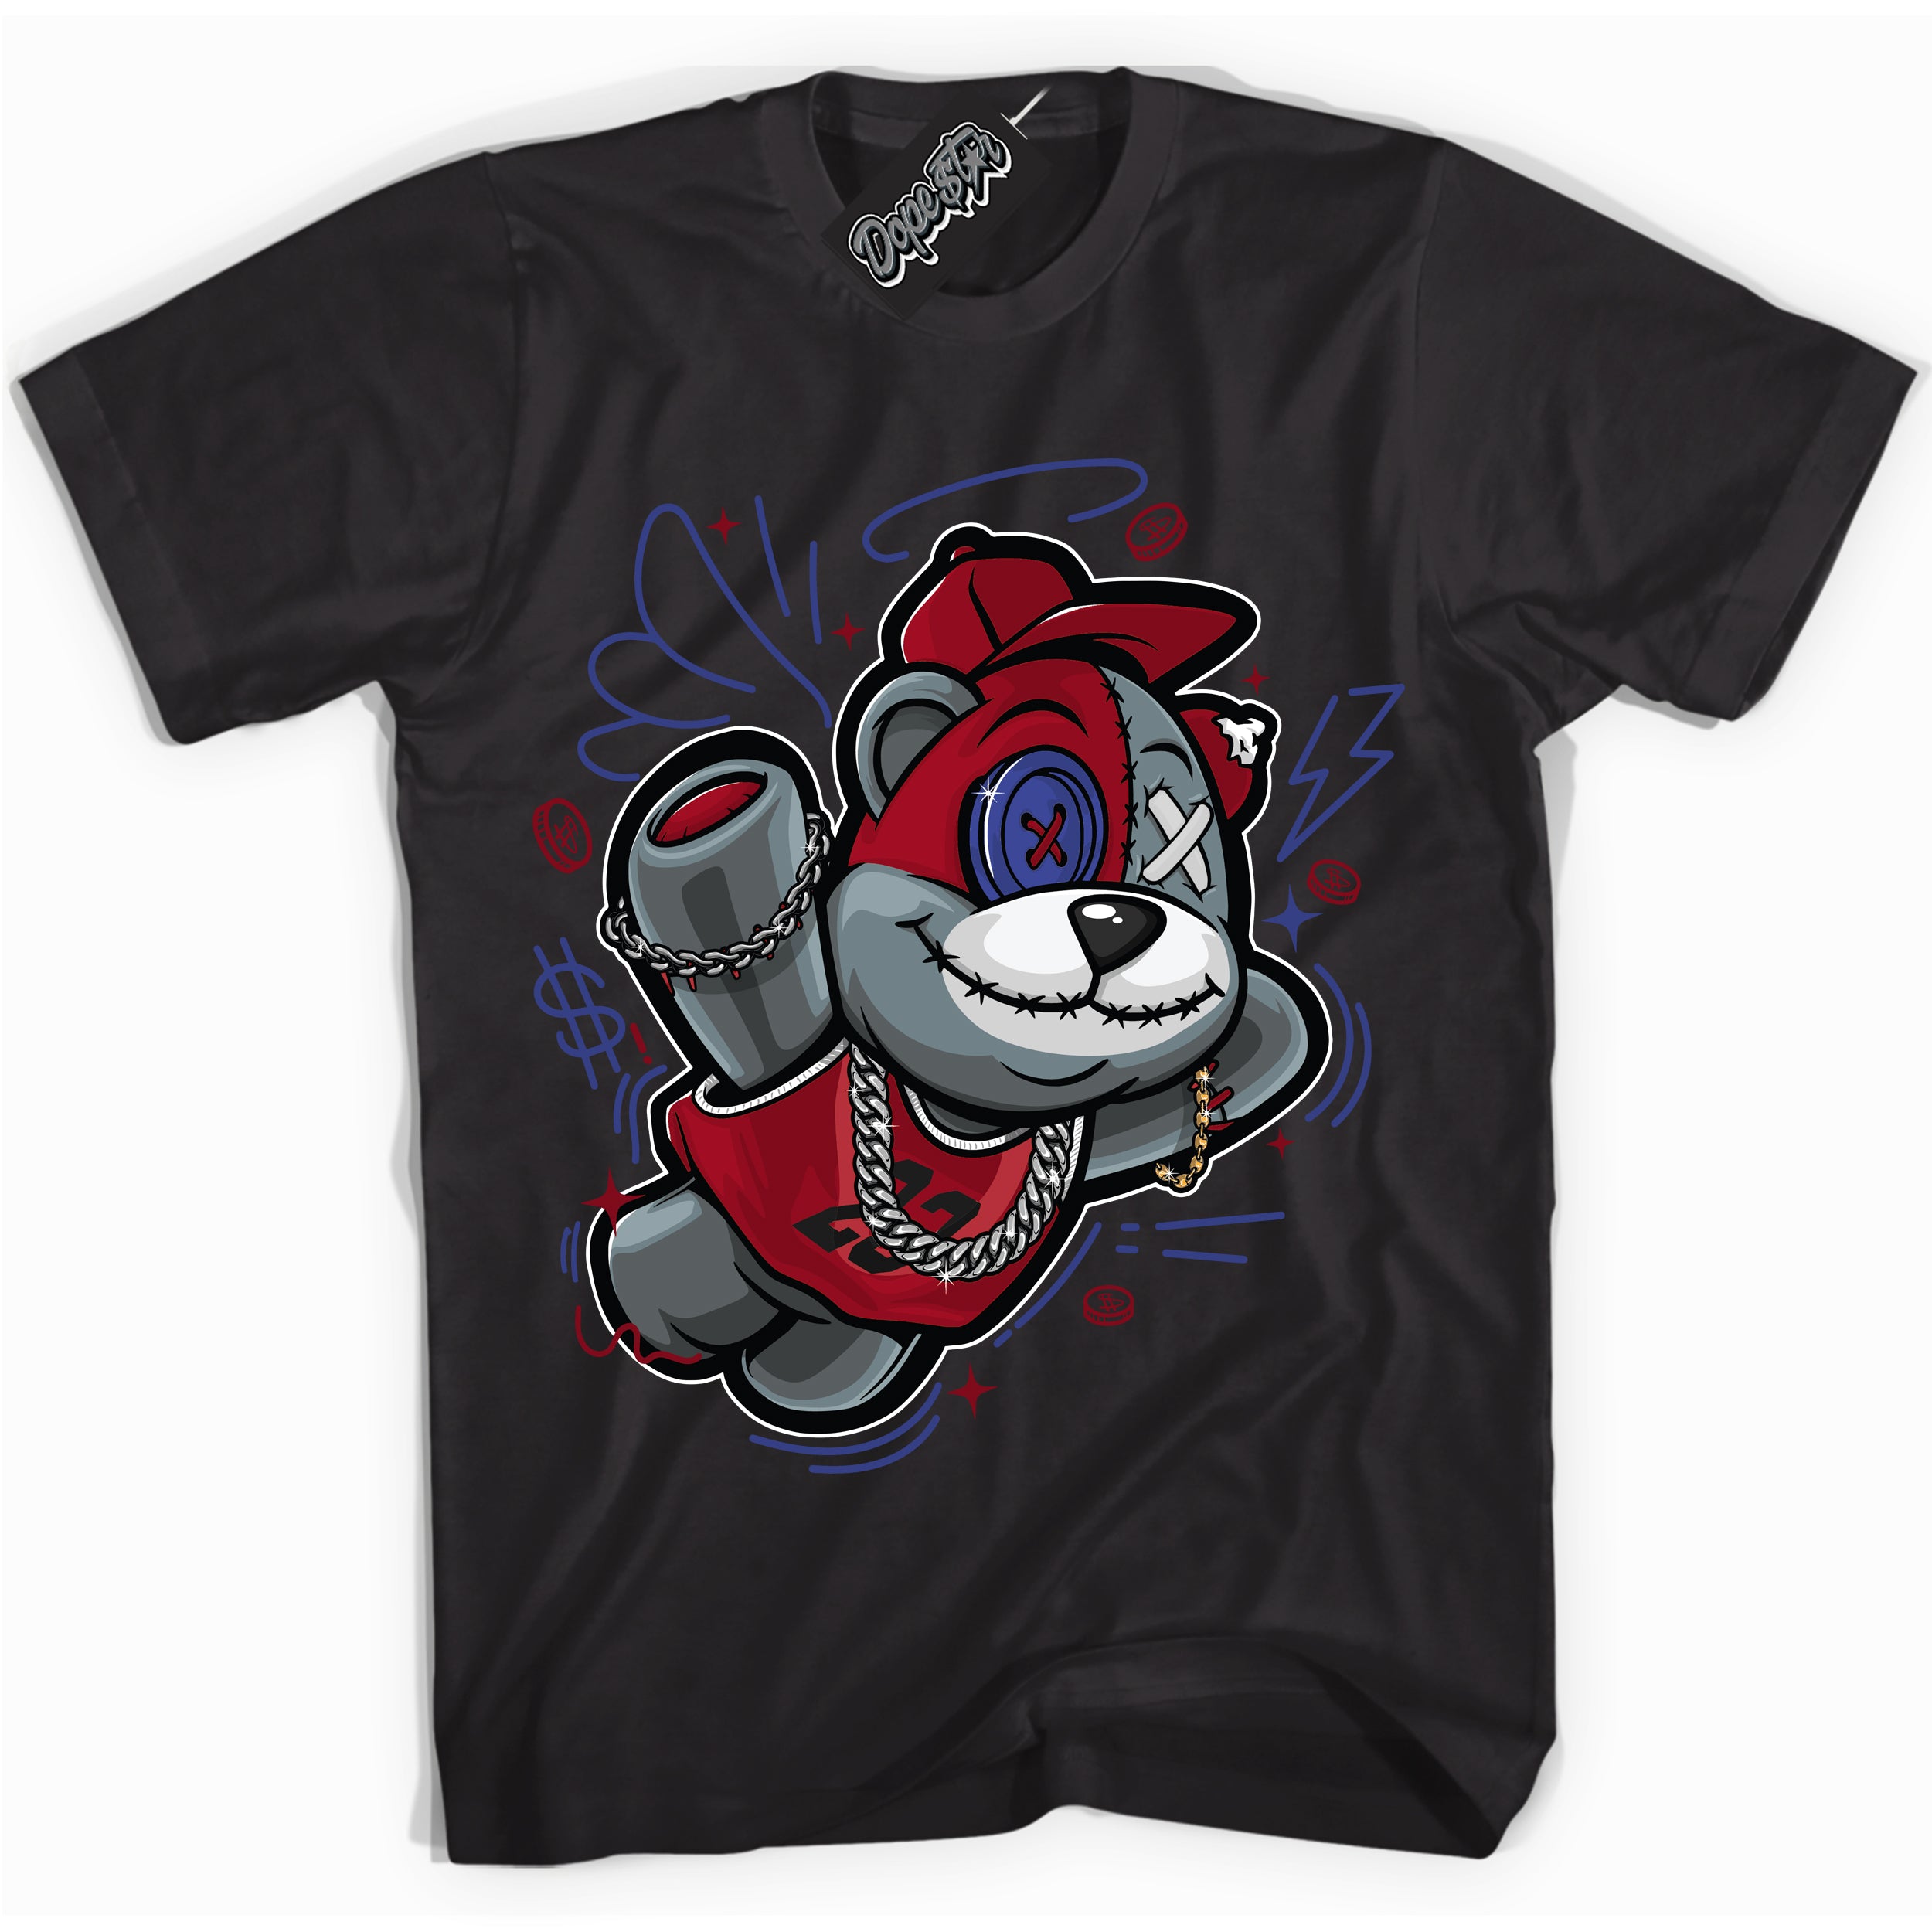 Cool Black Shirt with “ Slam Dunk Bear ” design that perfectly matches Playoffs 8s Sneakers.